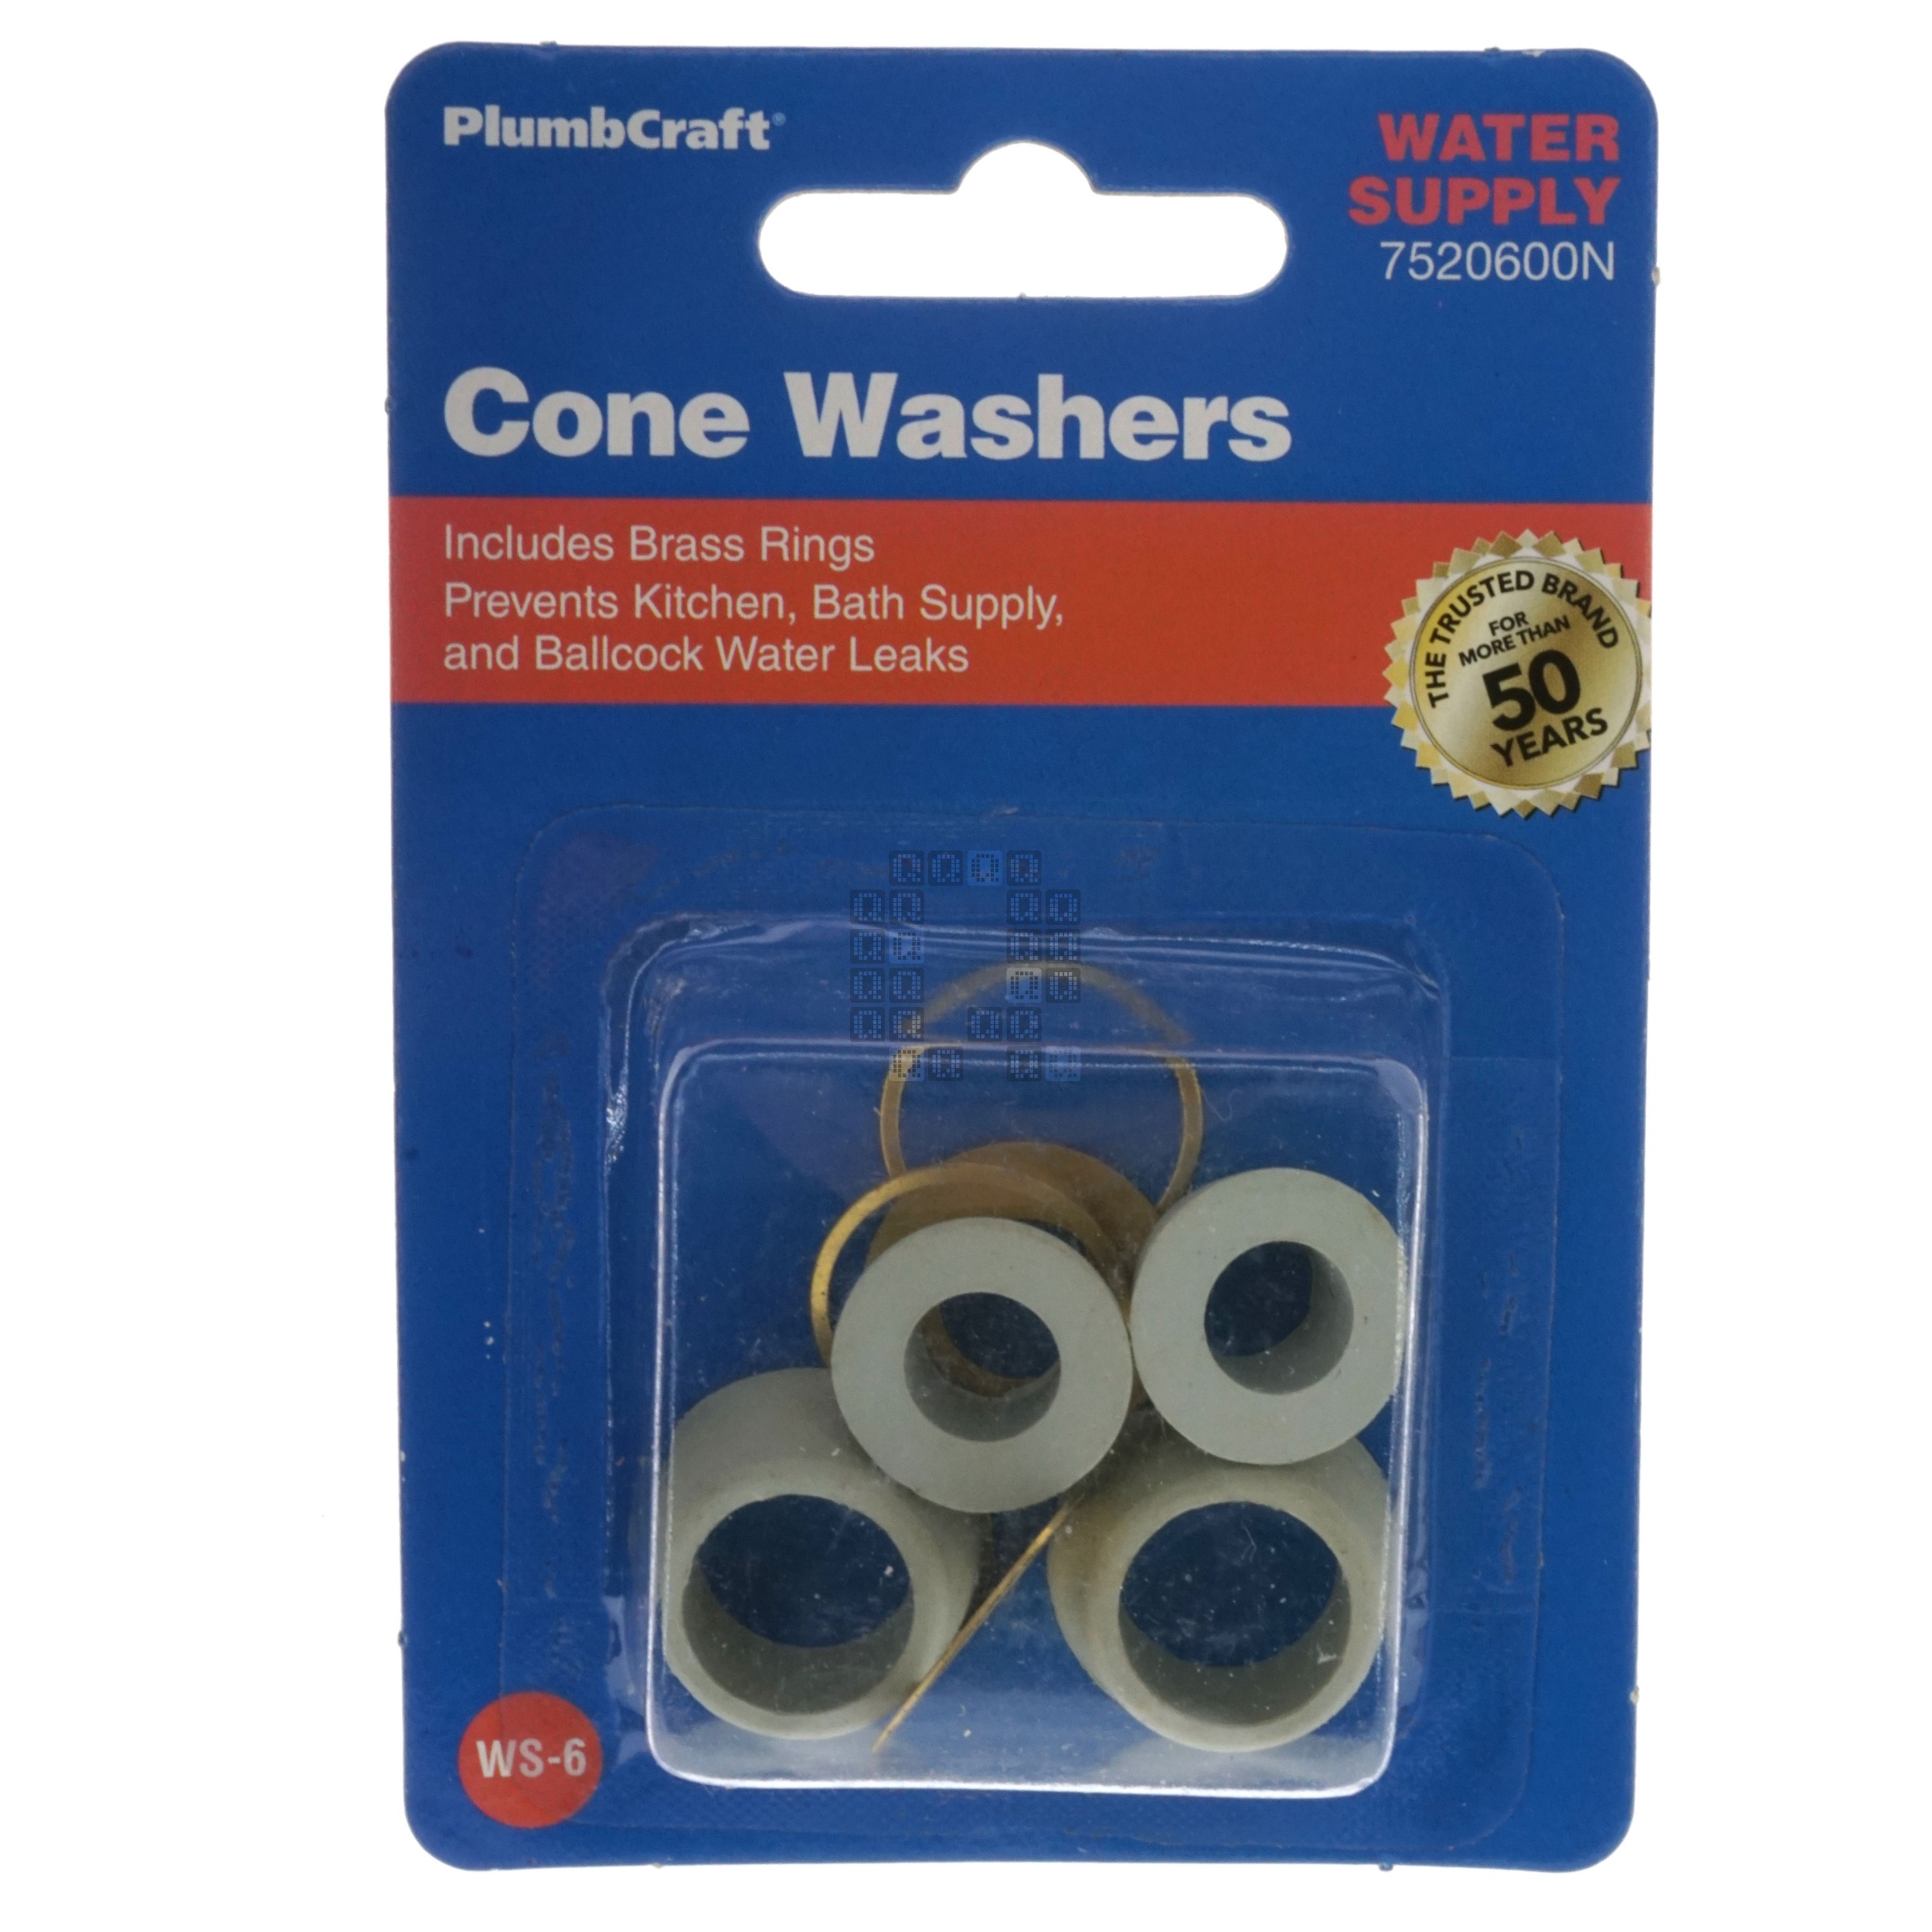 PlumbCraft 7520600N 8-Piece Cone Washers Kit with Brass Rings